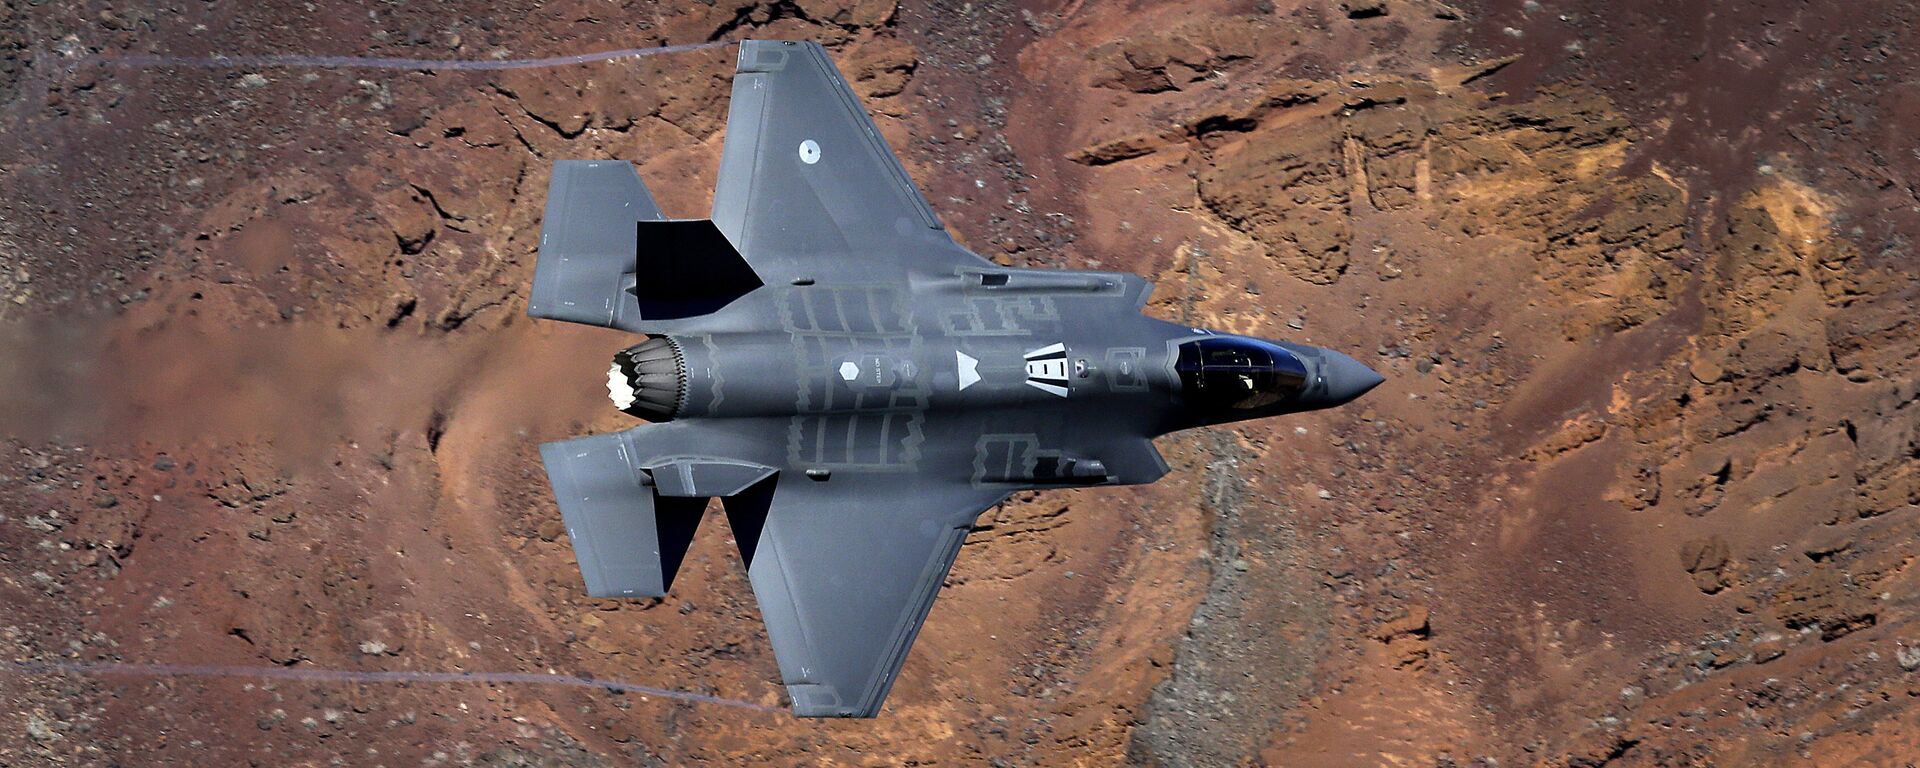 In this Feb. 28, 2017, photo, a Lockheed Martin F-35A Lighting II from the 323 Squadron, Royal Netherlands Air Force flies through the nicknamed Star Wars Canyon on the Jedi transition in Death Valley National Park, Calif. - Sputnik International, 1920, 28.09.2021